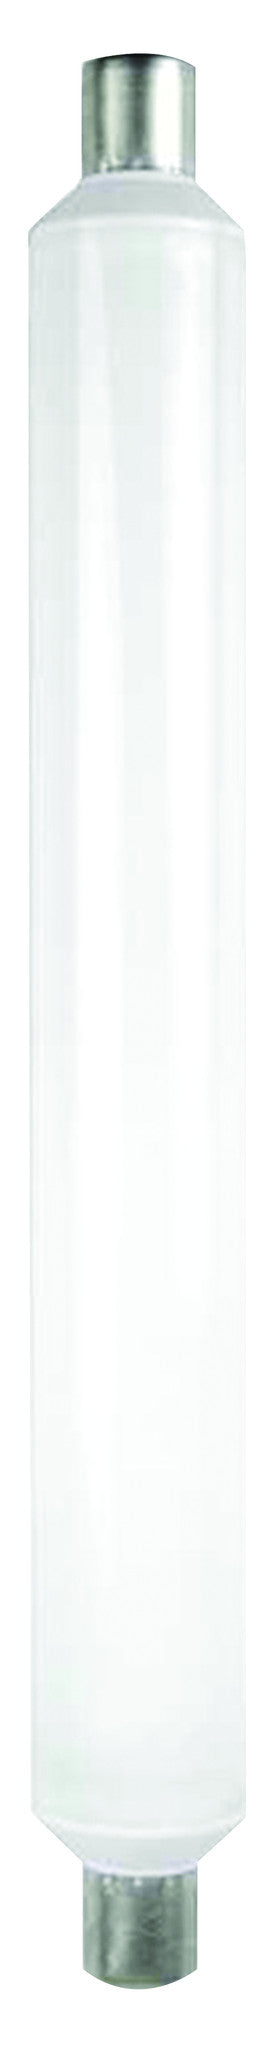 997108 - Tube Linolite LED S19 309mm 12W 2700K 1000Lm GS TUBE The Lampco - The Lamp Company